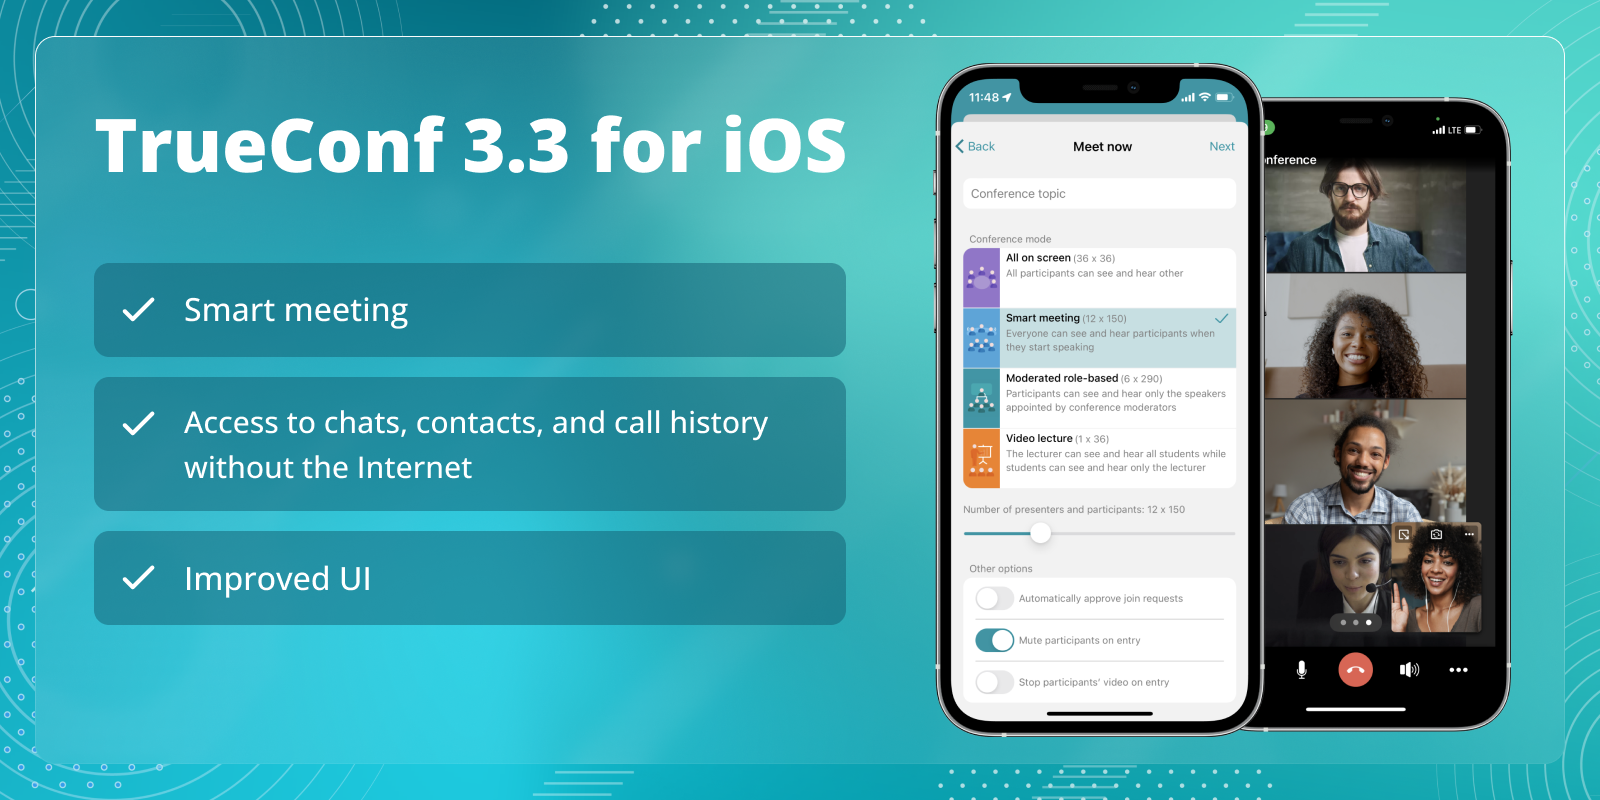 TrueConf 3.3 for iOS: new UI, Smart meeting mode, offline access to chats, contacts, and call history 2